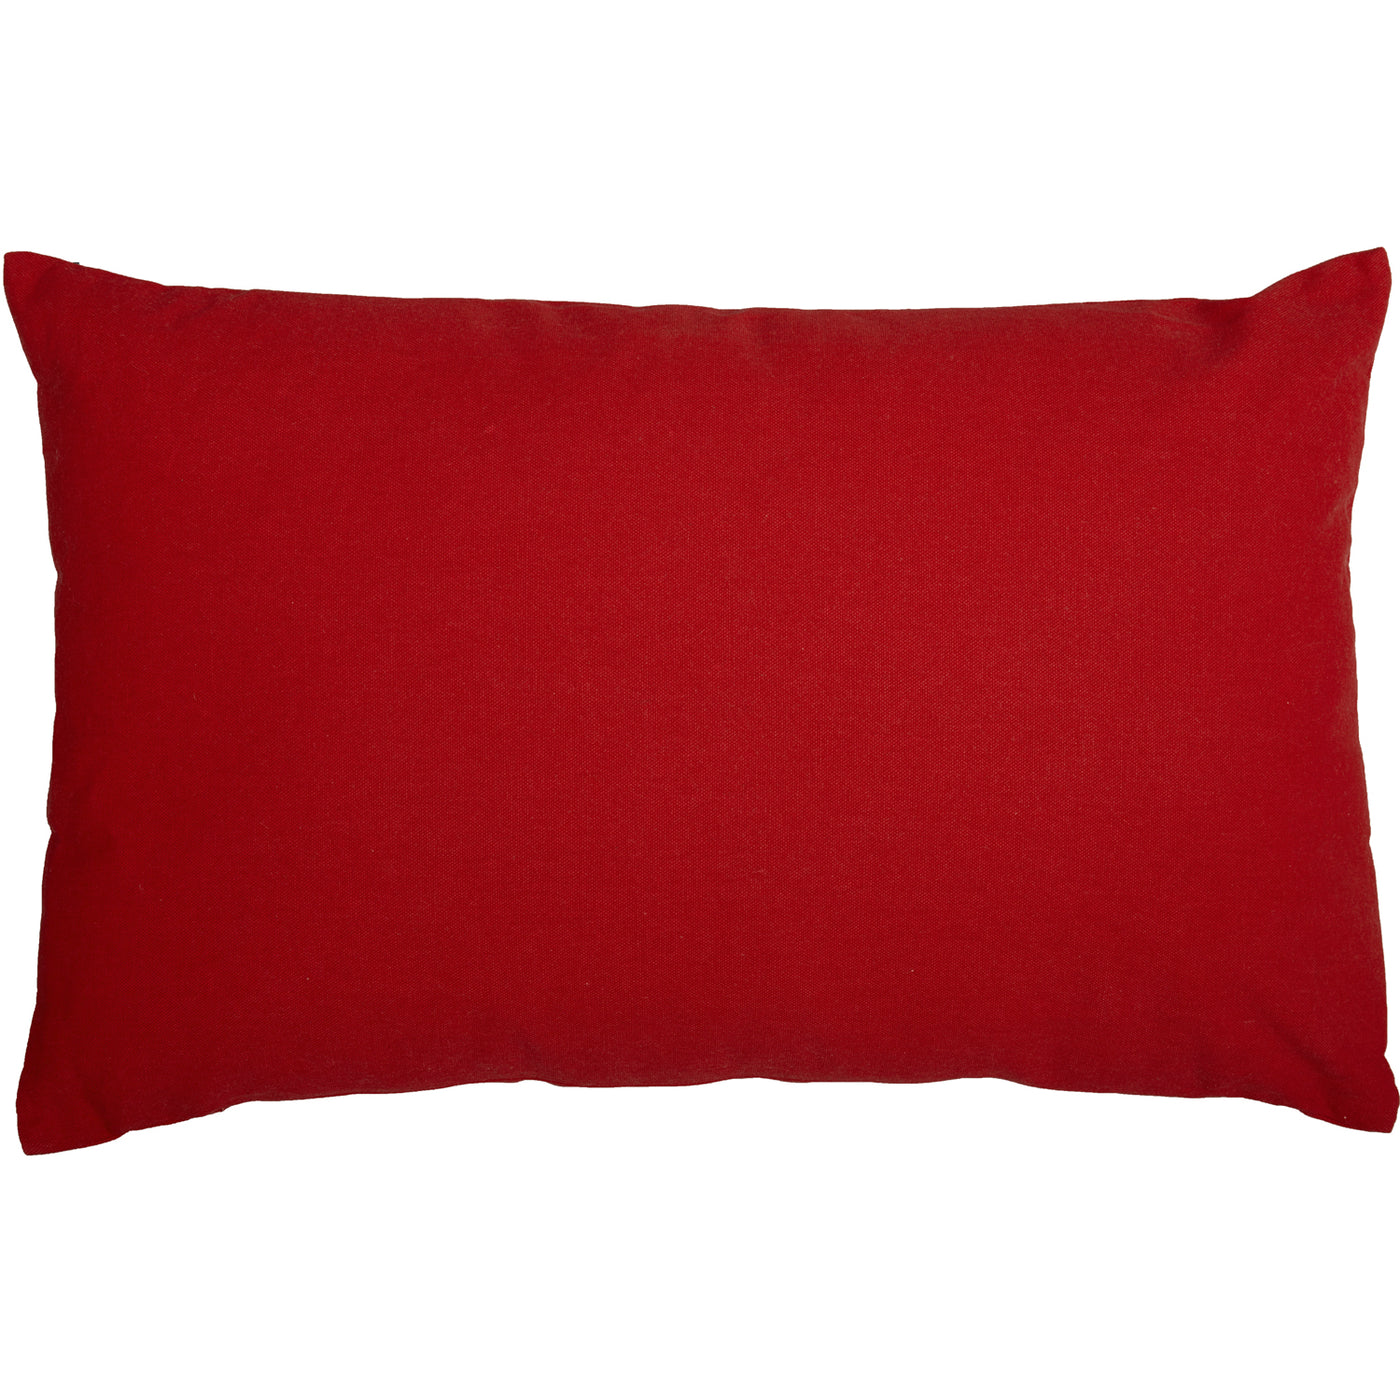 💙 North Pole Airmail Red Throw Pillow